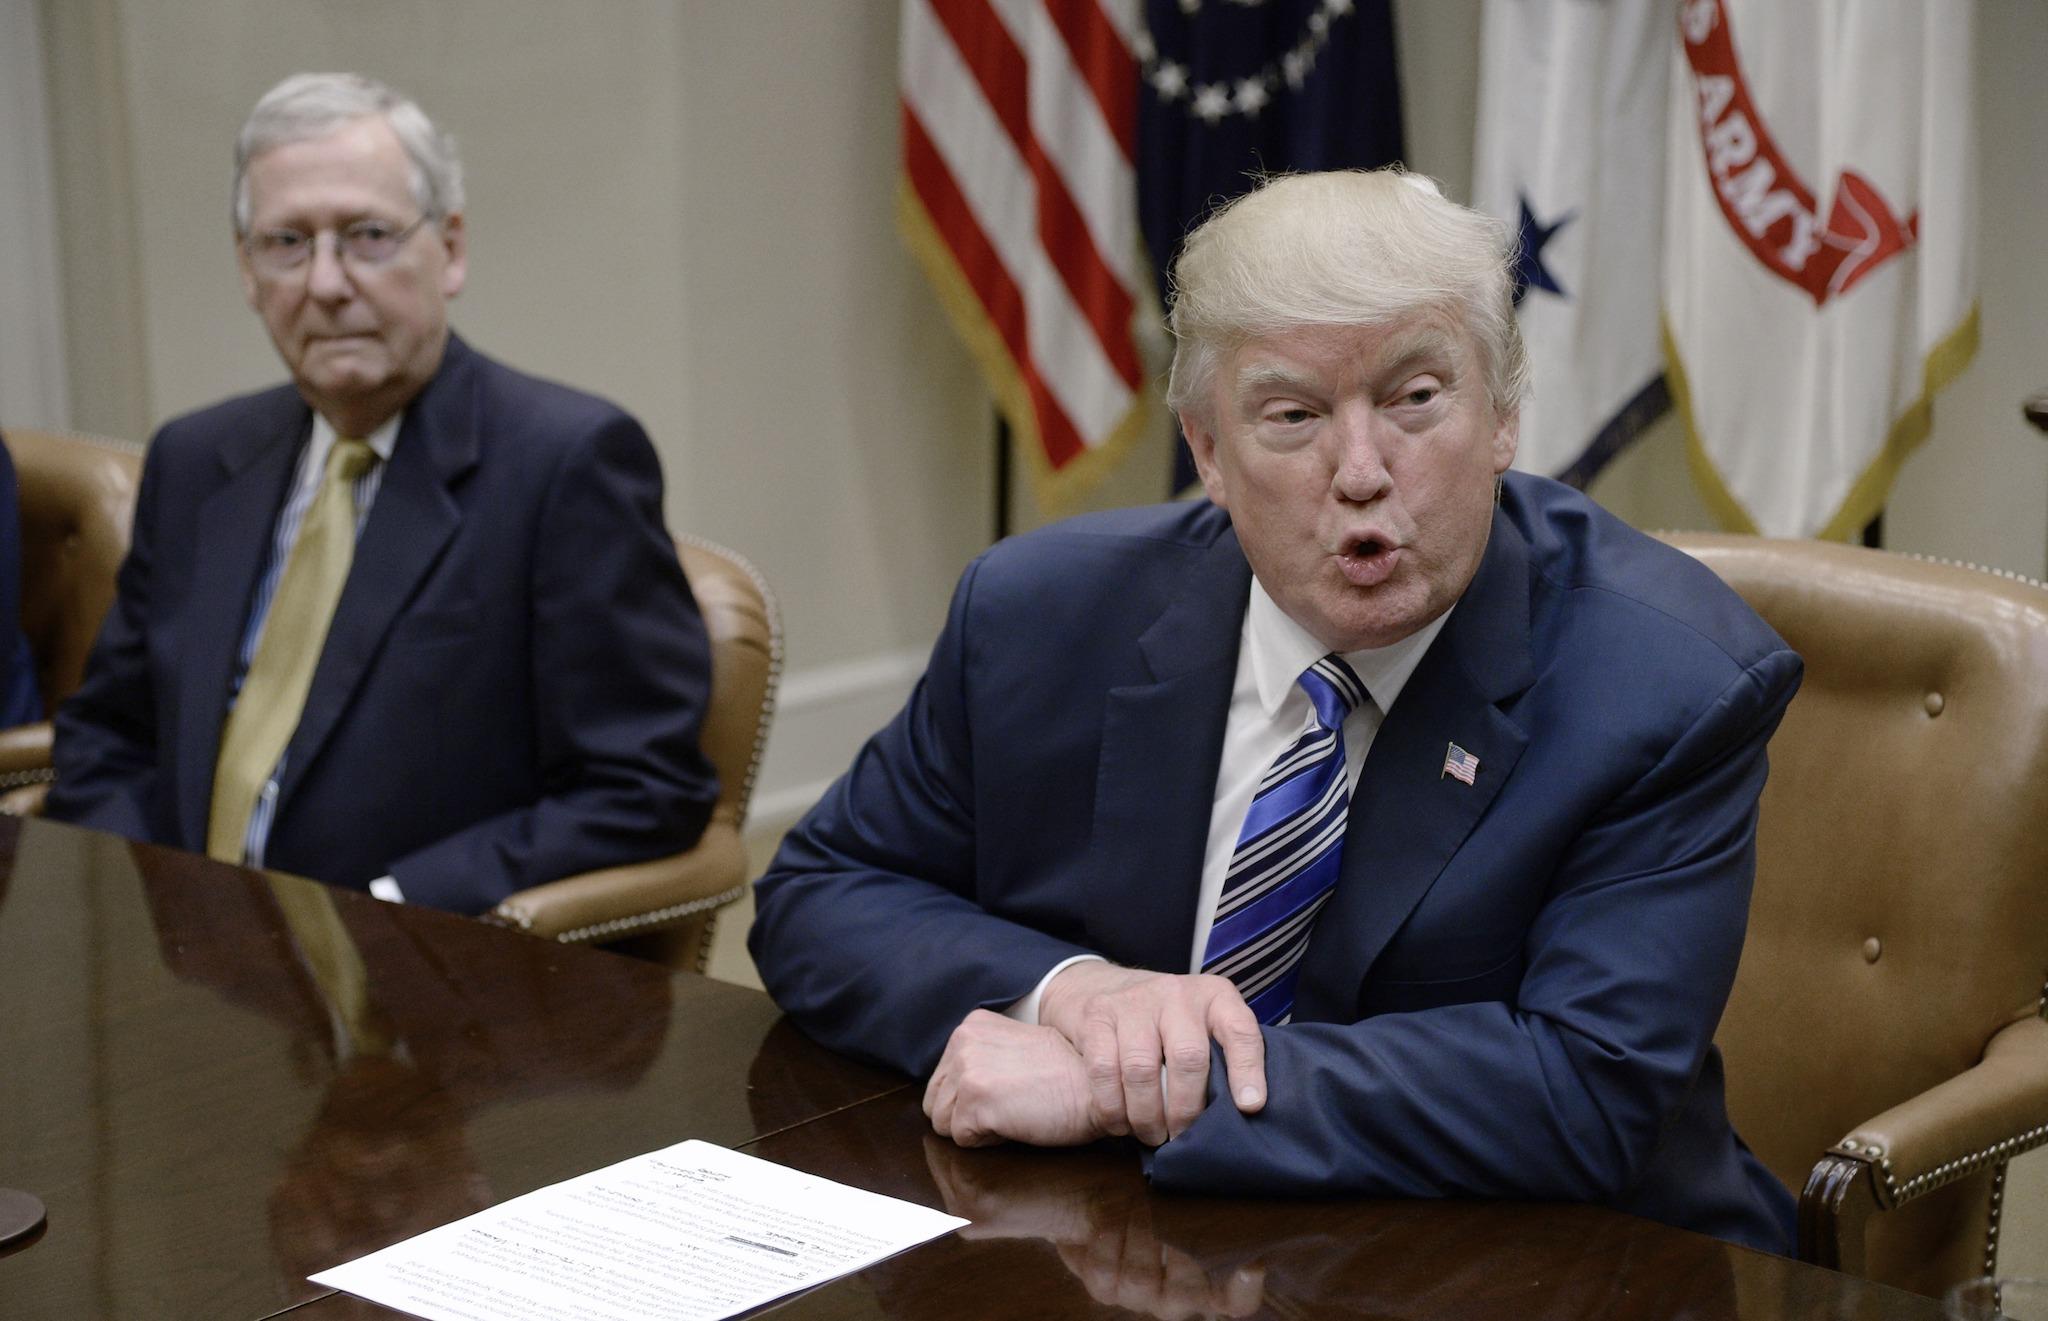 US President Donald Trump and Senate Majority Leader Mitch McConnell